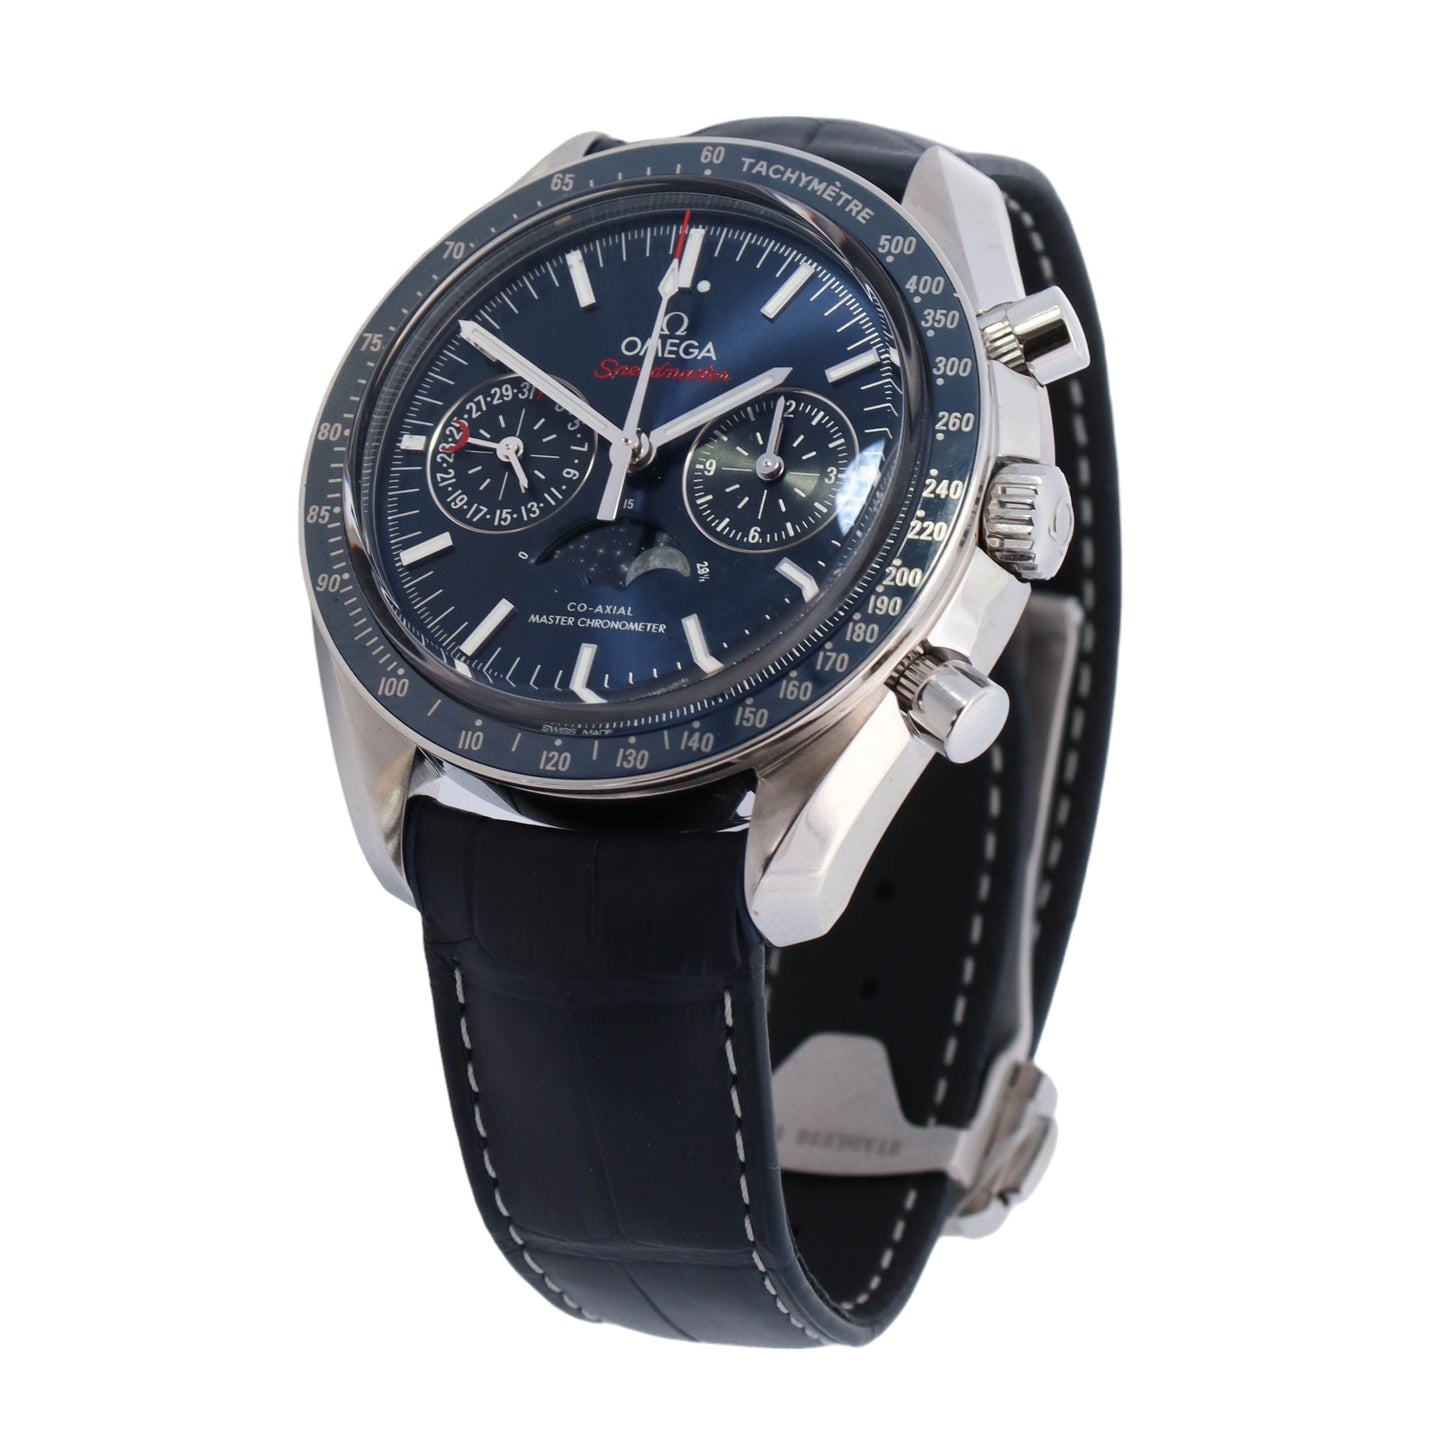 Omega Speedmaster Moon Phase Chronograph 44,25 Stainless Steel Blue Chronograph Dial Watch Reference #:  304.33.44.52.03.001 - Happy Jewelers Fine Jewelry Lifetime Warranty